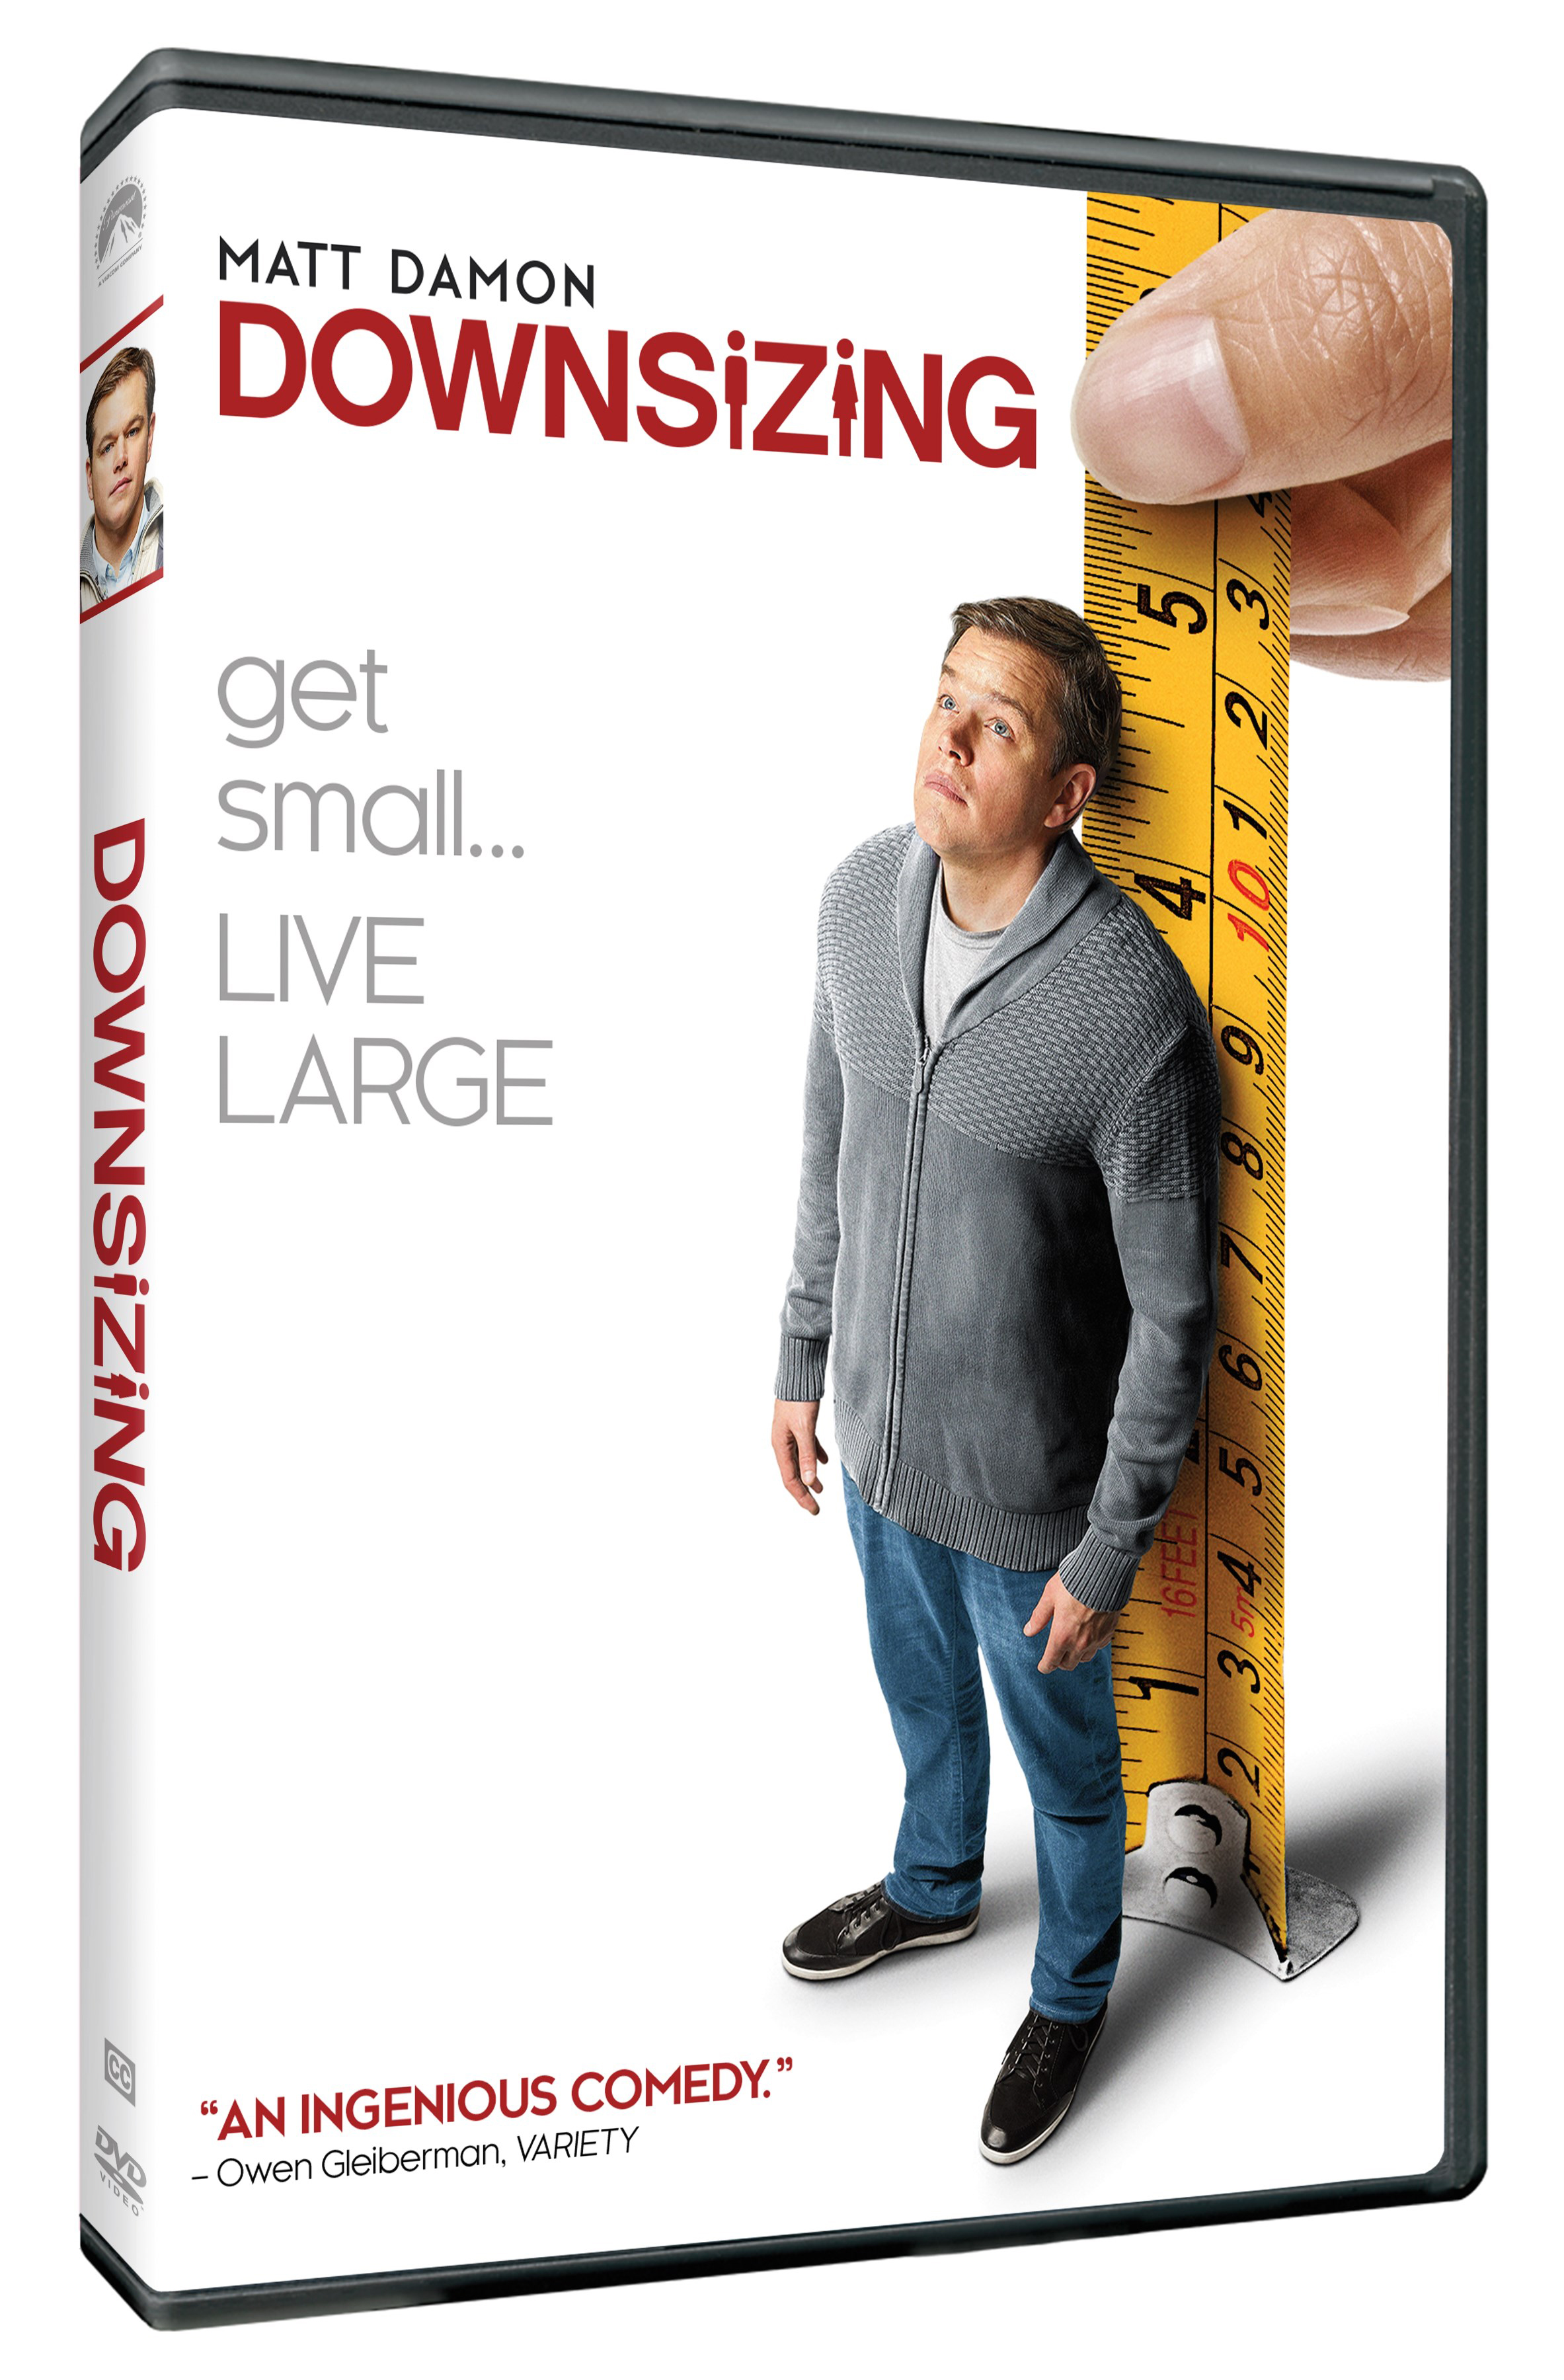 Downsizing DVD cover (Paramount Home Entertainment)